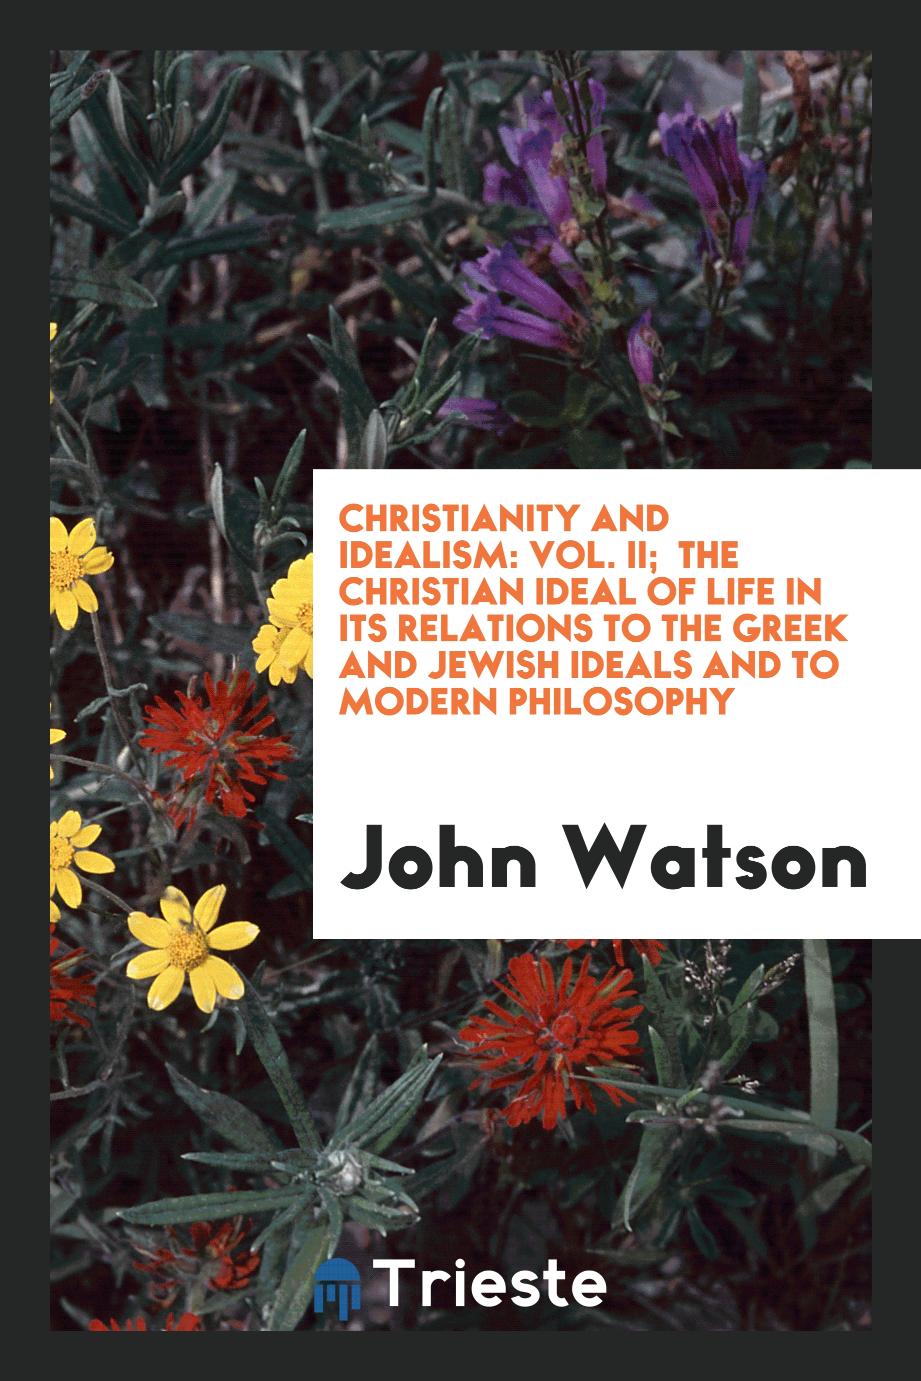 Christianity and idealism: Vol. II; the Christian ideal of life in its relations to the Greek and Jewish ideals and to modern philosophy